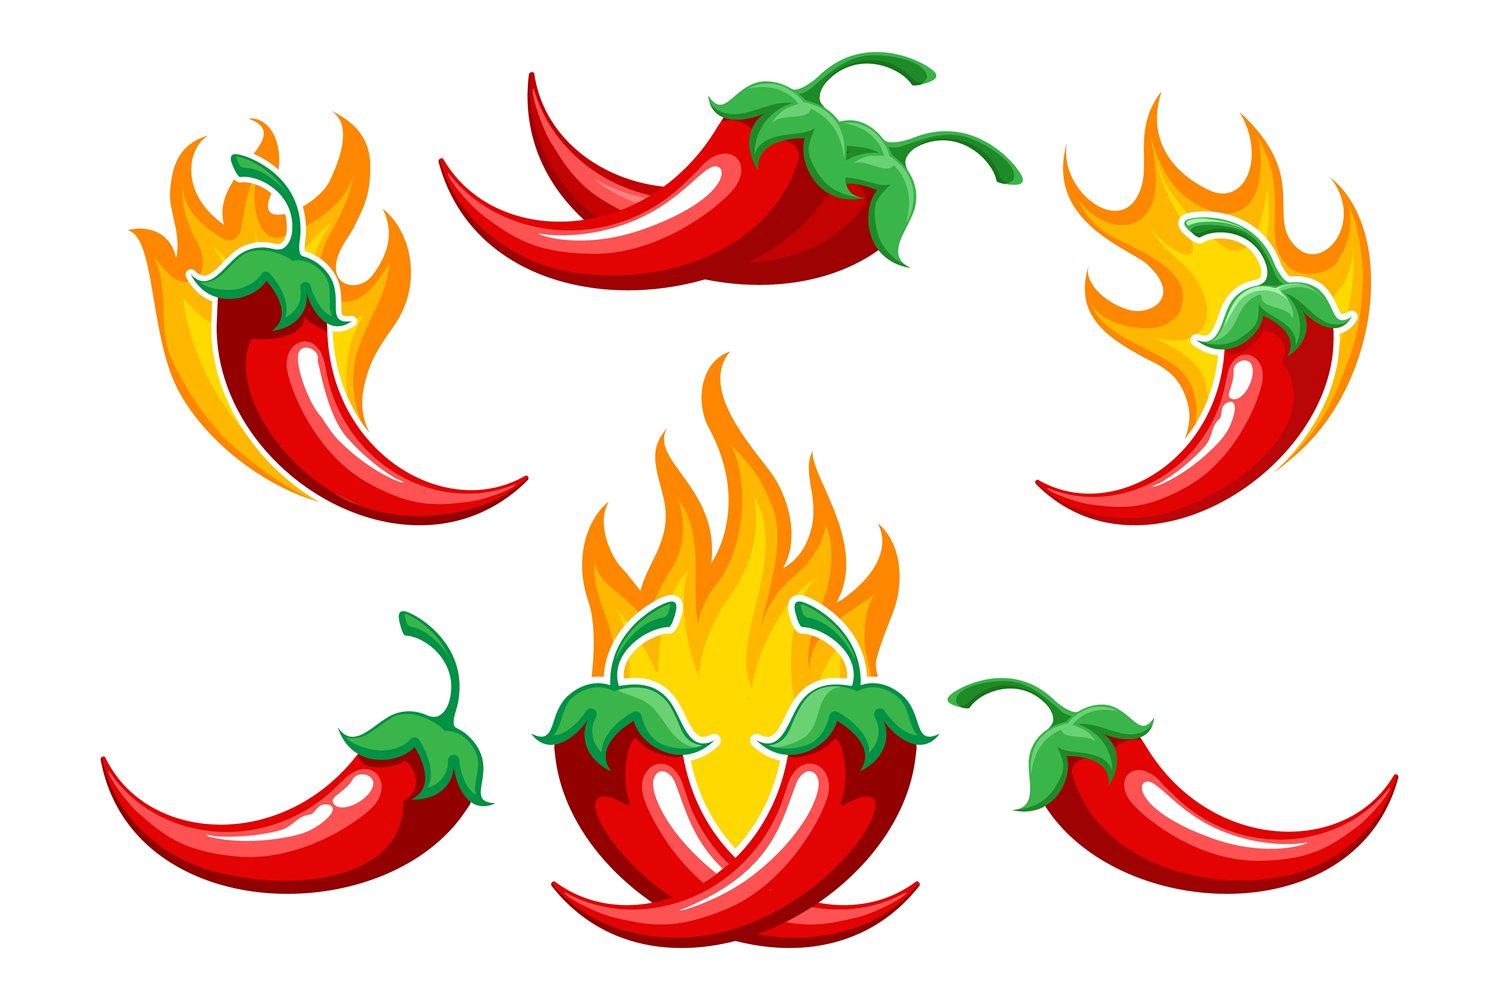 Fire chili peppers collection.